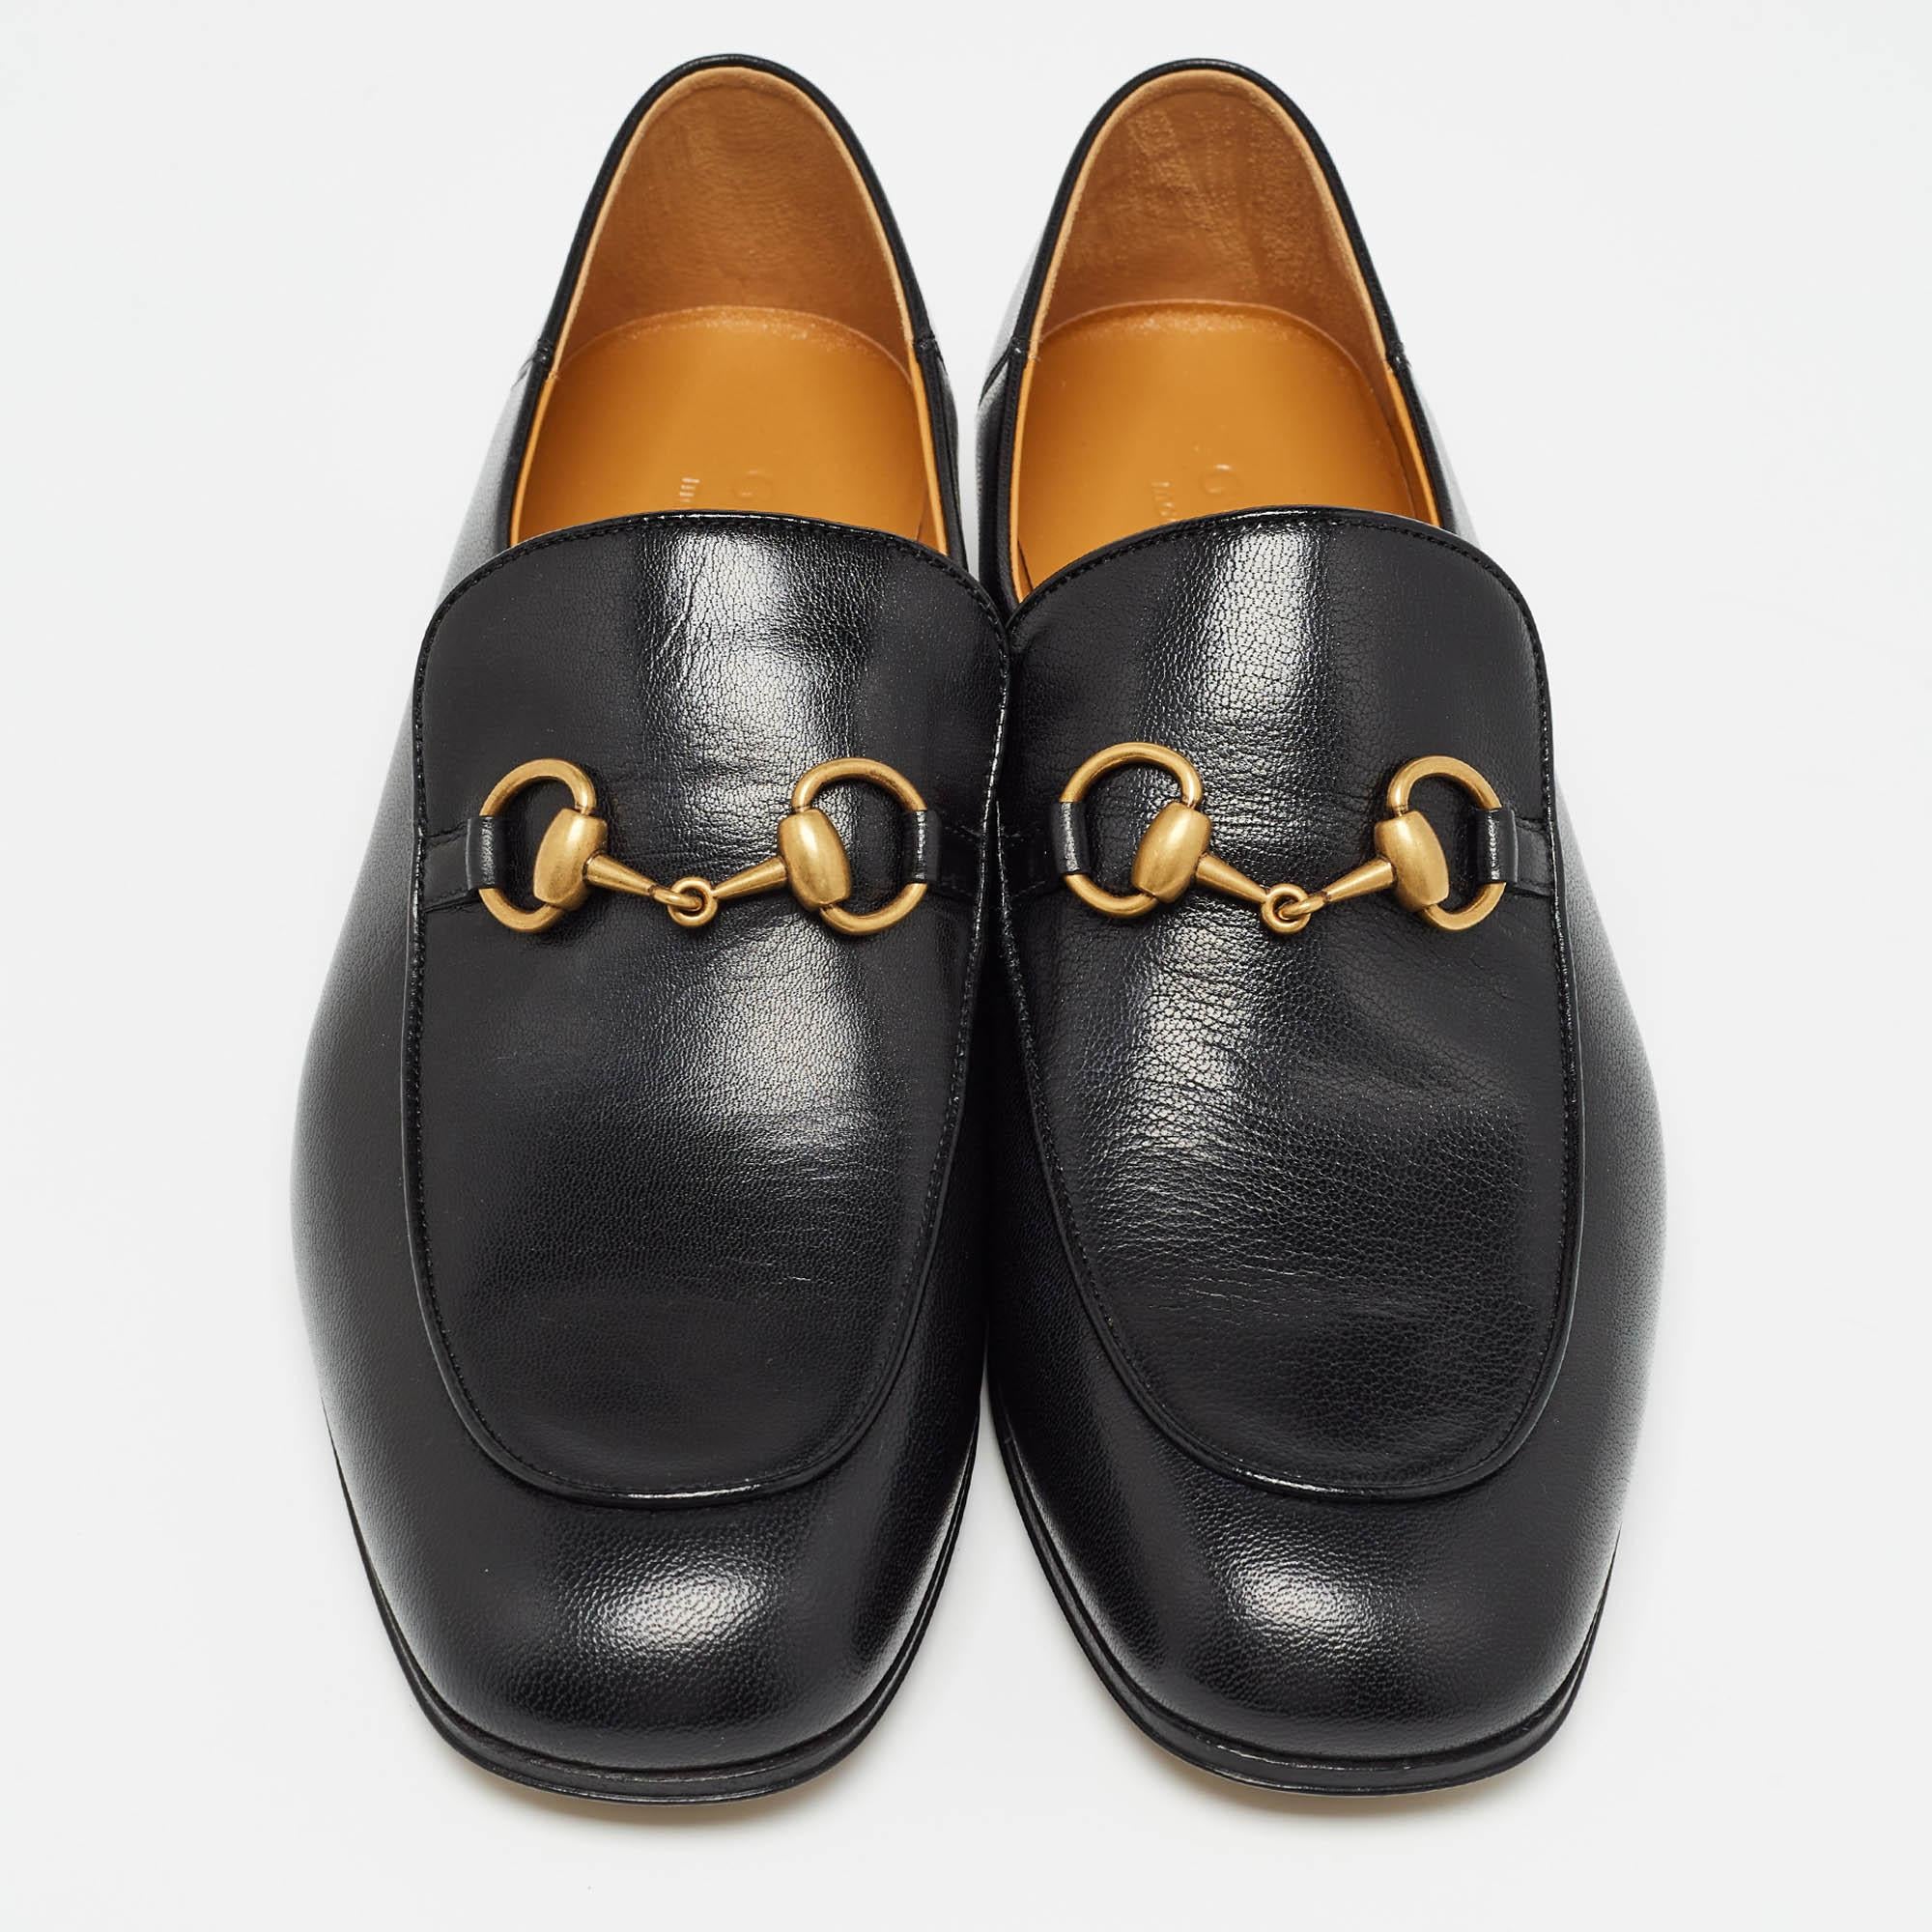 Gucci Black Leather Horsebit Foldable Loafers Size 41 1